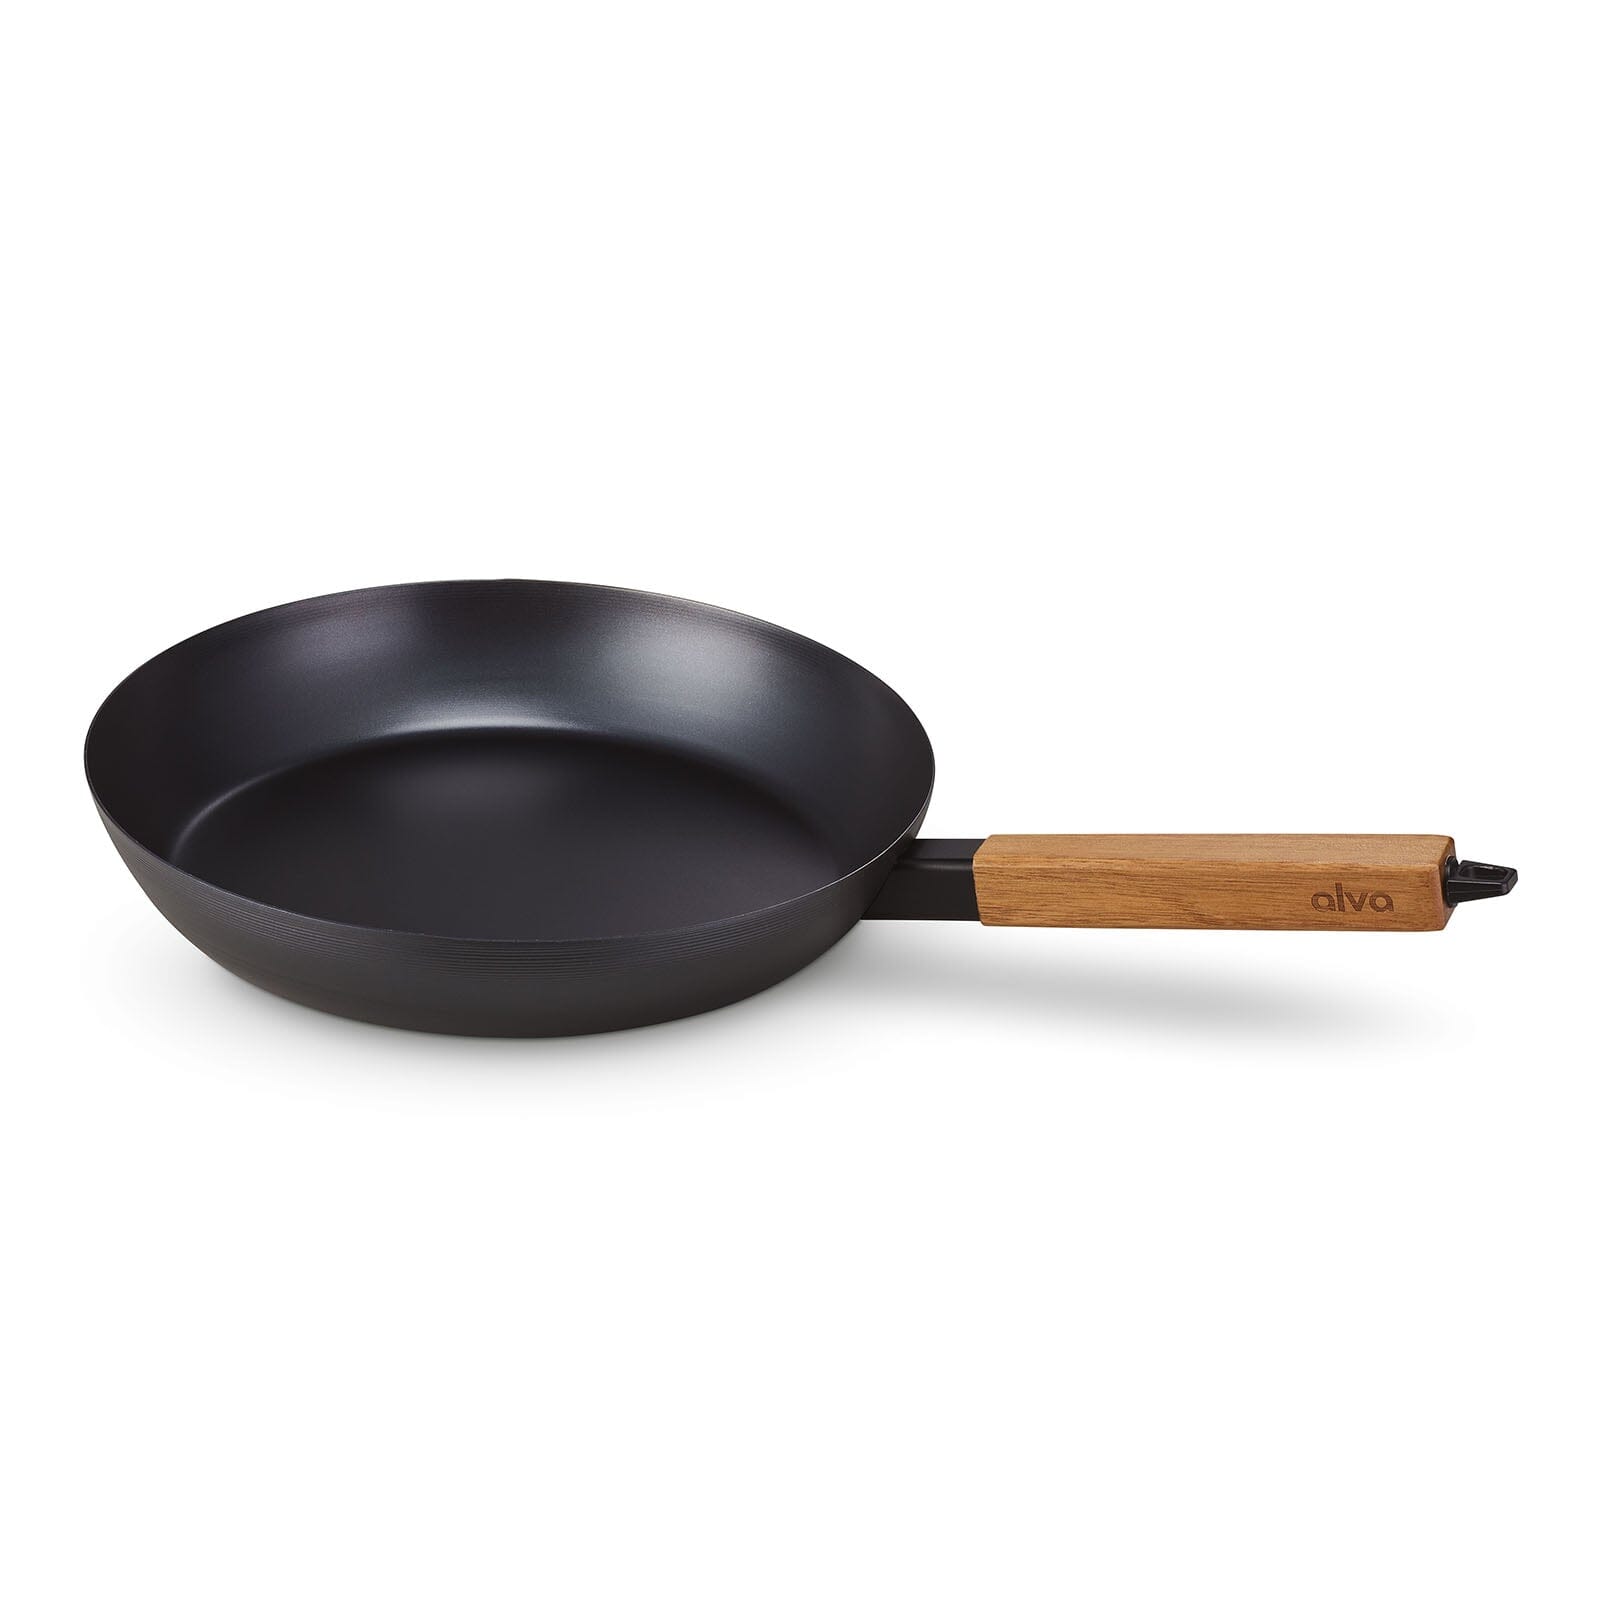 My quest for a PFAS-free frying pan